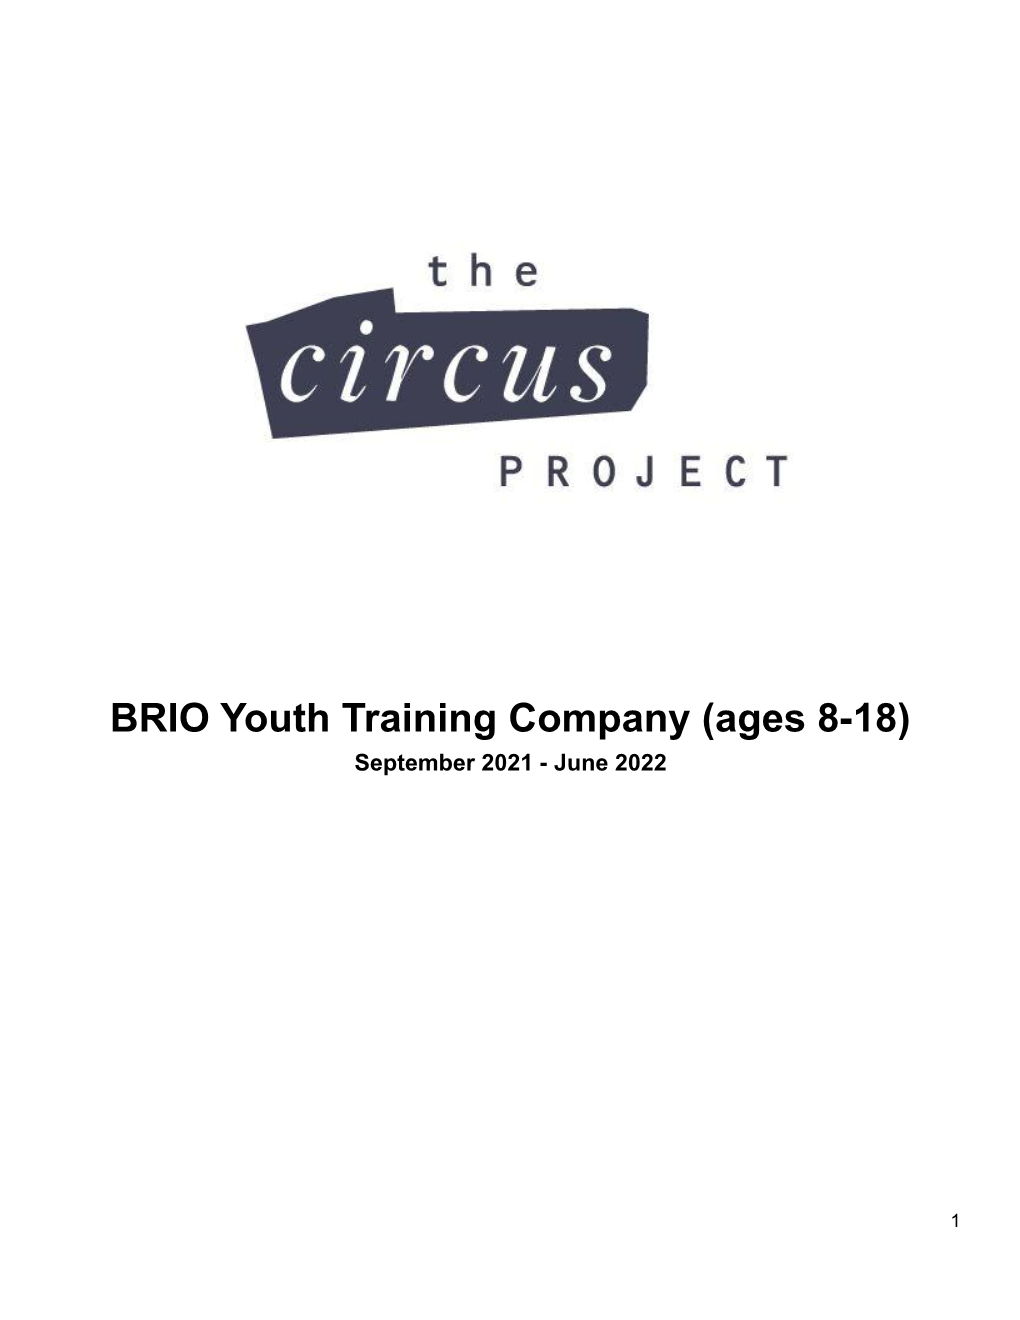 BRIO Youth Training Company (Ages 8-18) September 2021 - June 2022